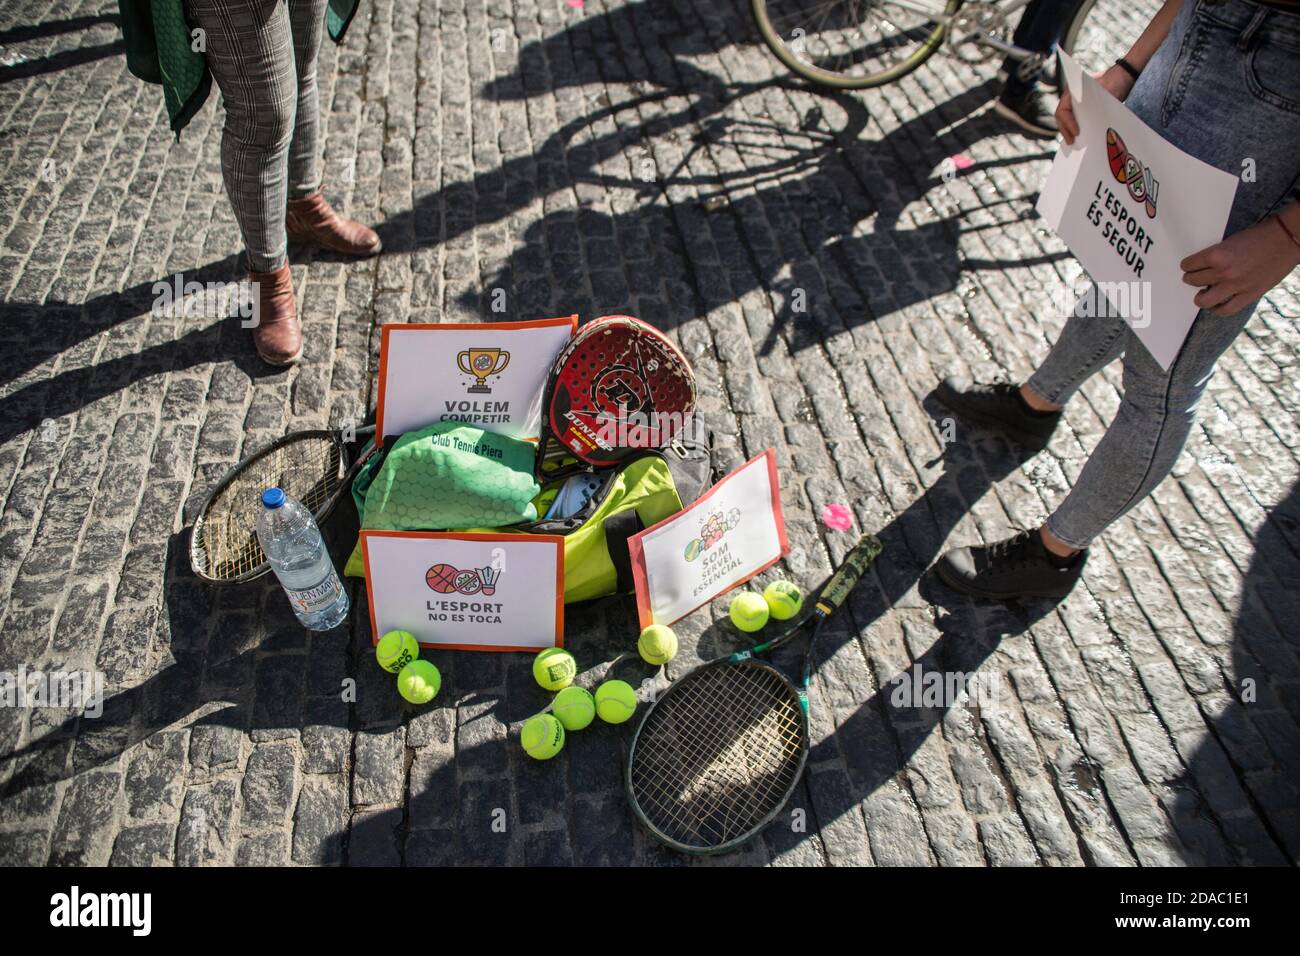 November 11, 2020: Racket and tennis balls are seen in demonstration.Catalan sports federations and entities have demonstrated in Barcelona to demand the reopening of gyms and sports facilities in Catalonia Credit: Thiago PrudÃªNcio/DAX/ZUMA Wire/Alamy Live News Stock Photo